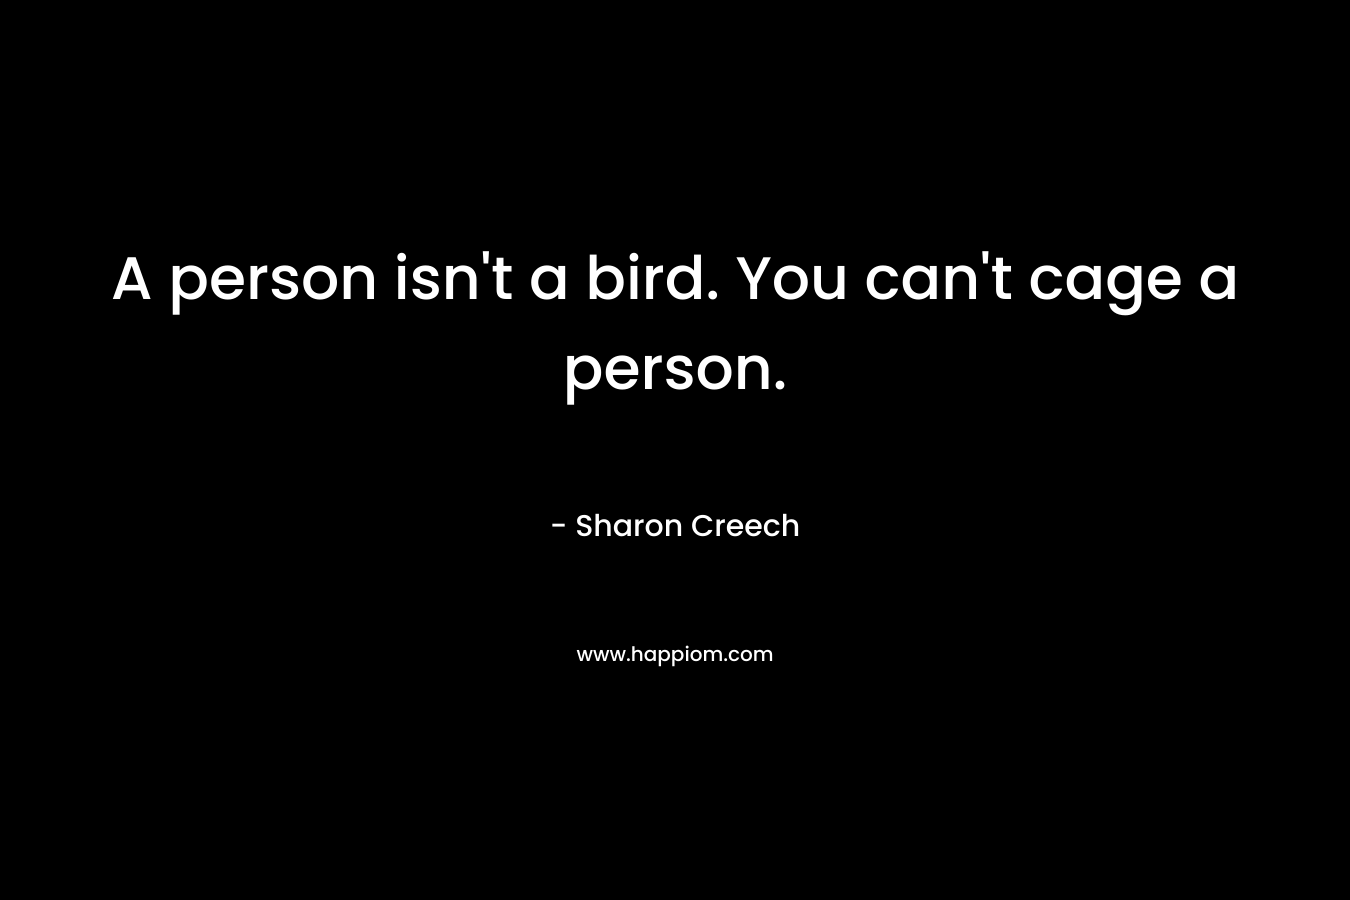 A person isn't a bird. You can't cage a person.